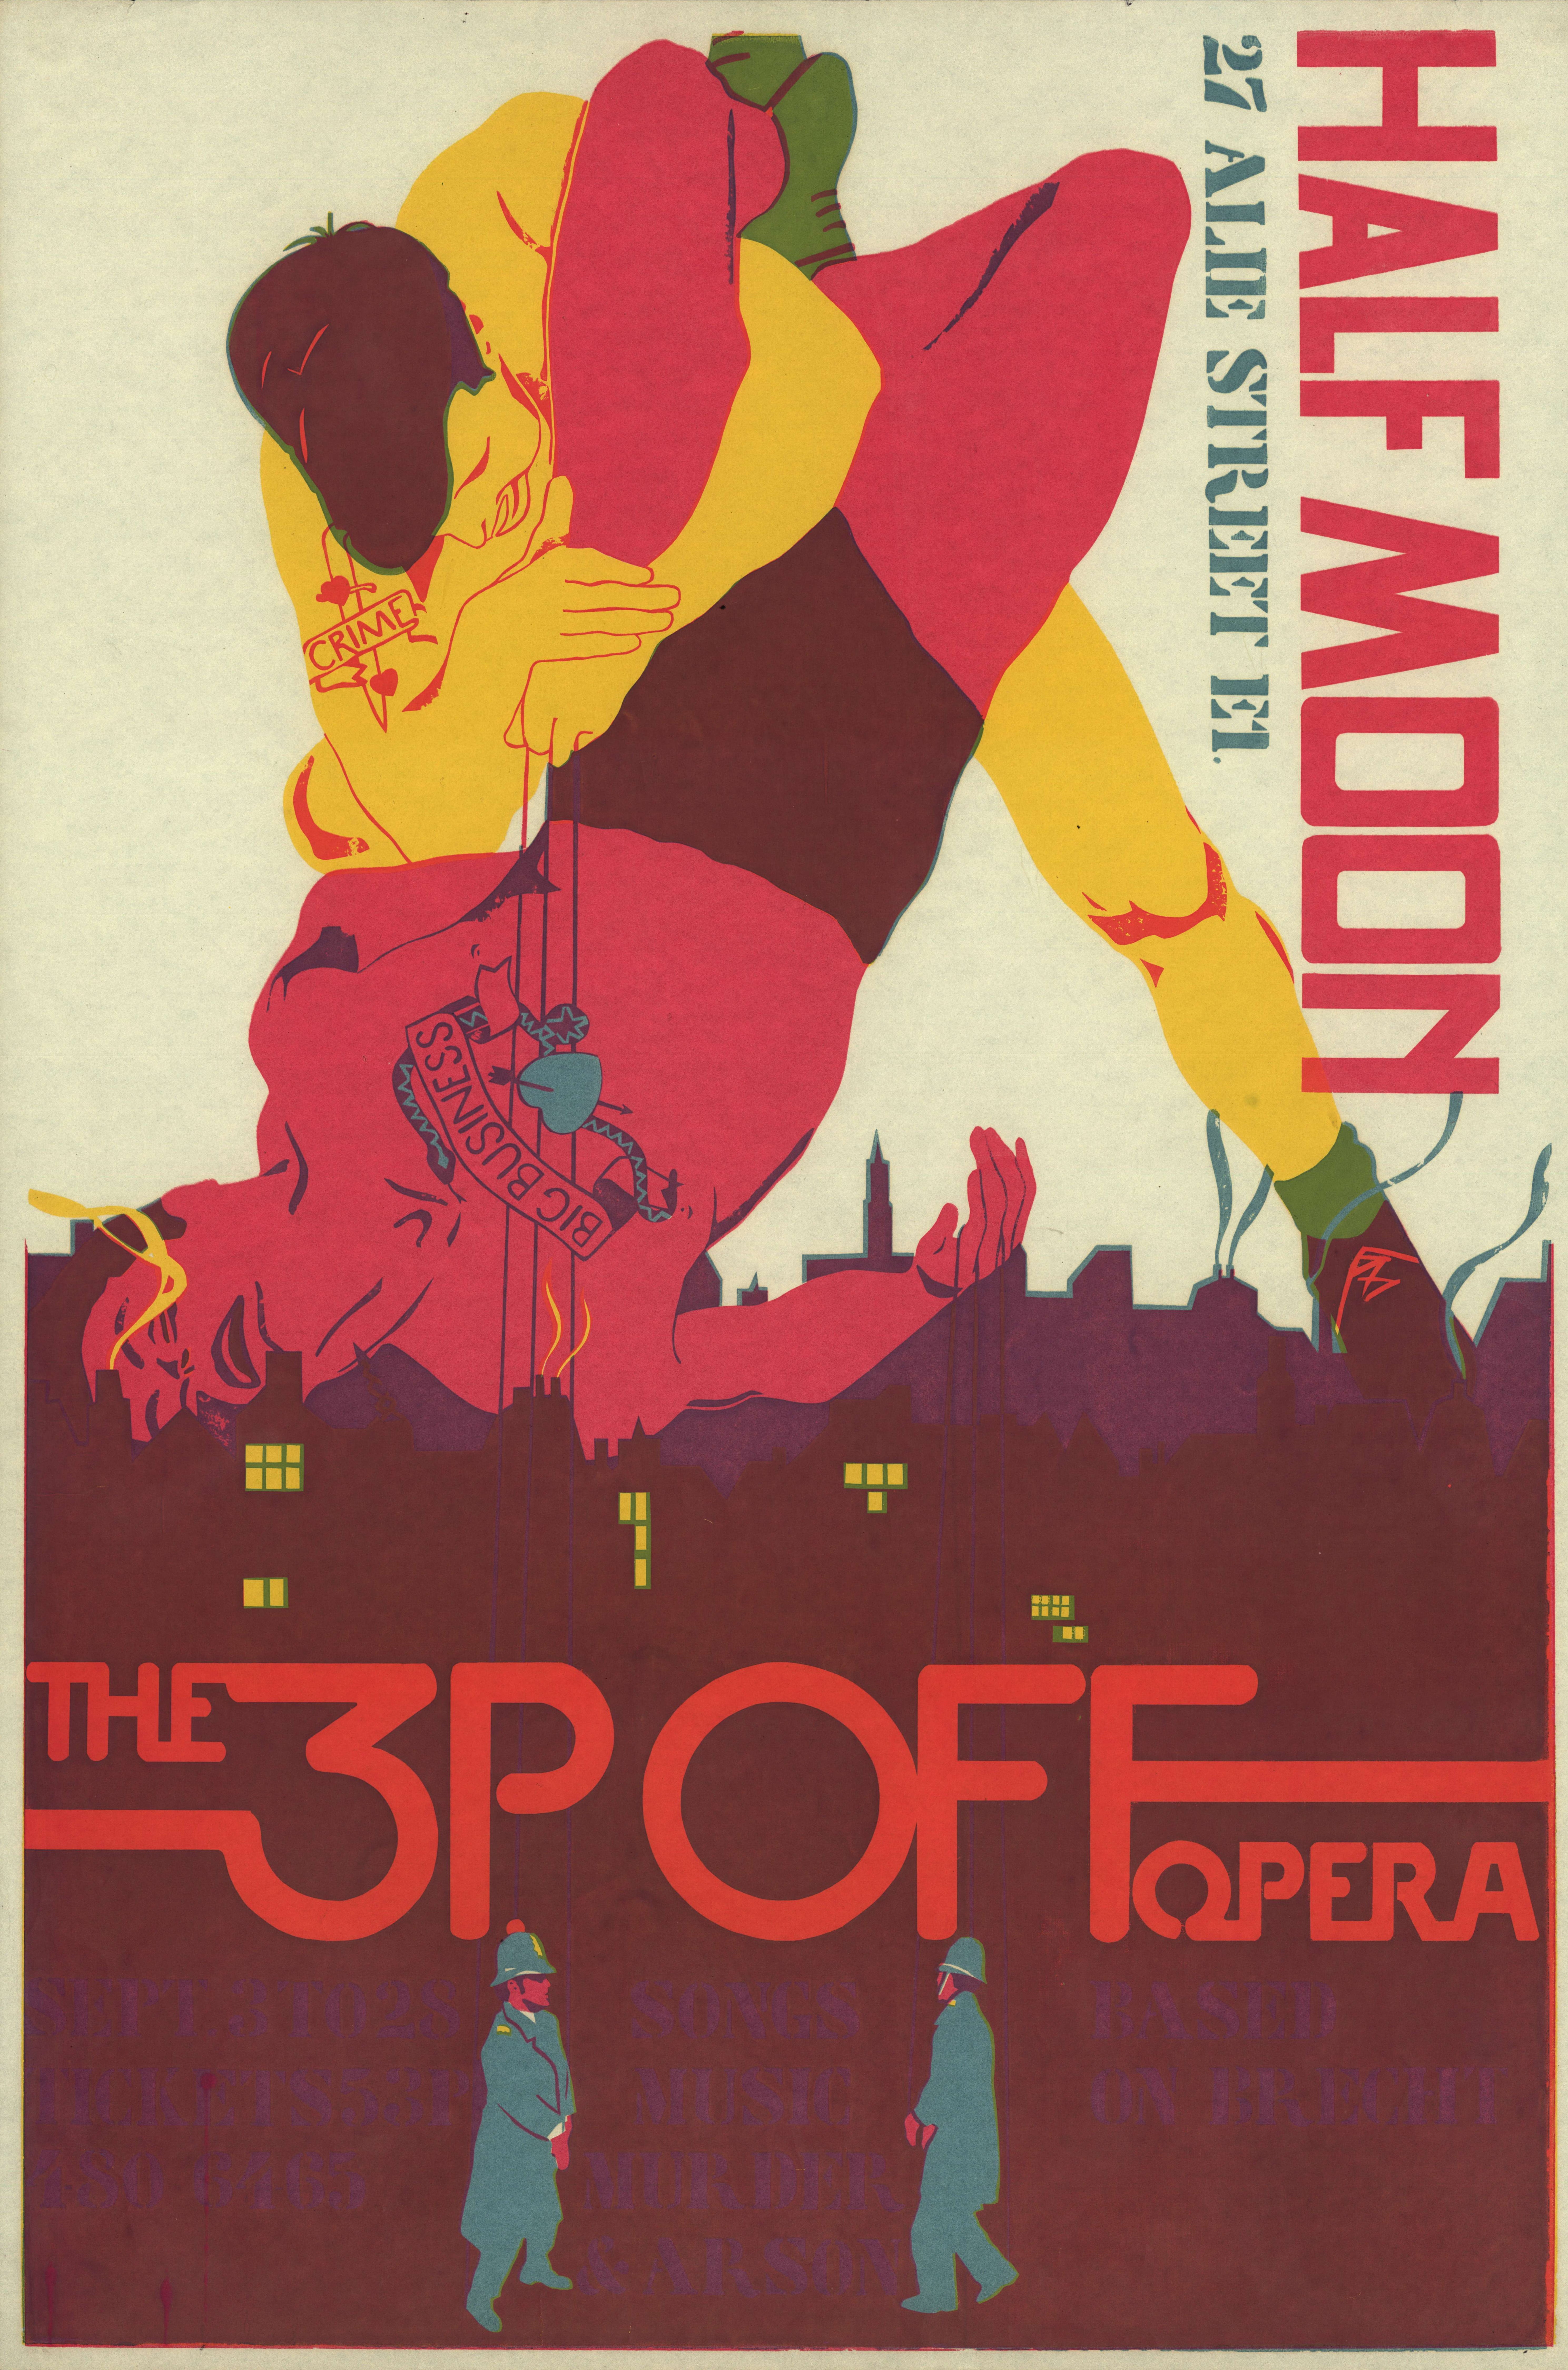 The 3P Off Opera poster